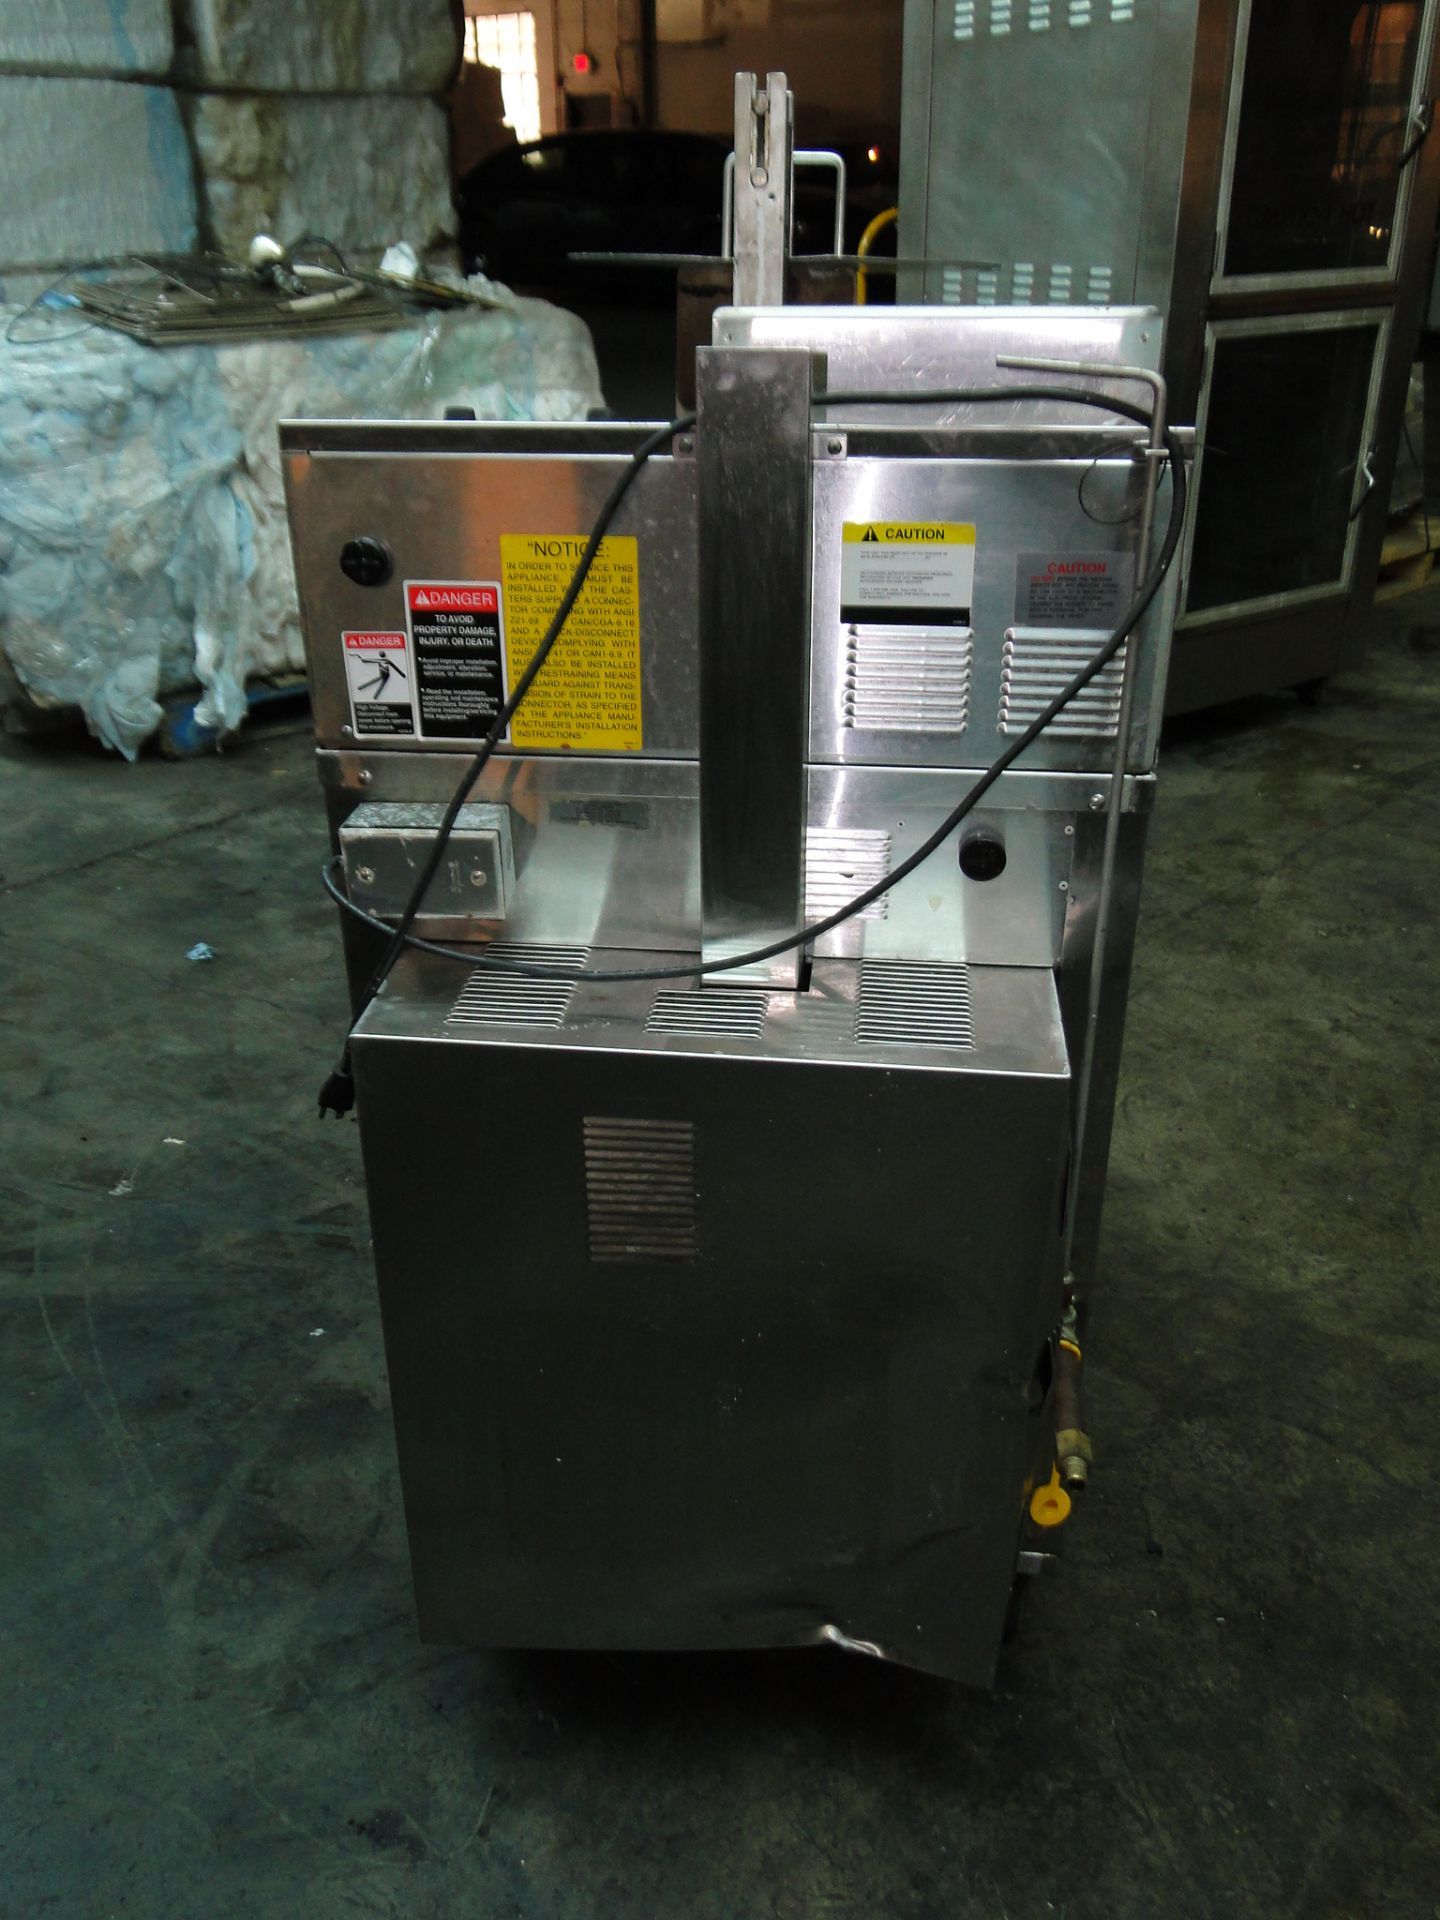 Giles "Chester Fried" Gas Fired Deep Fryer with Auto Lift, Model CF4006, S/N: A410310007, Equipped - Image 3 of 5